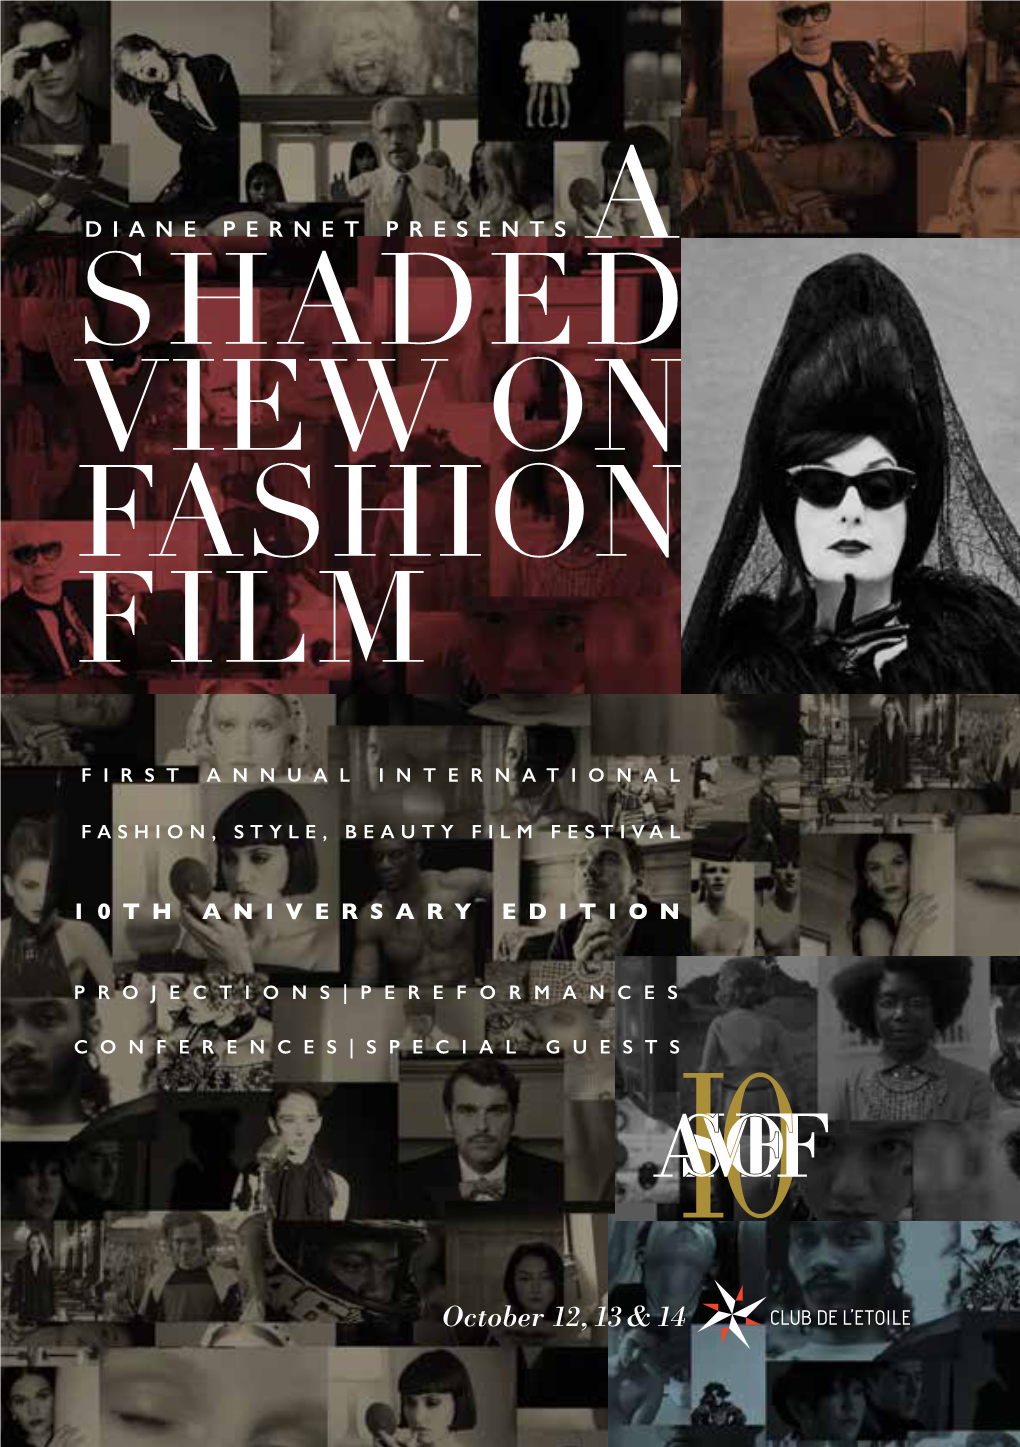 A Shaded View on Fashion Film